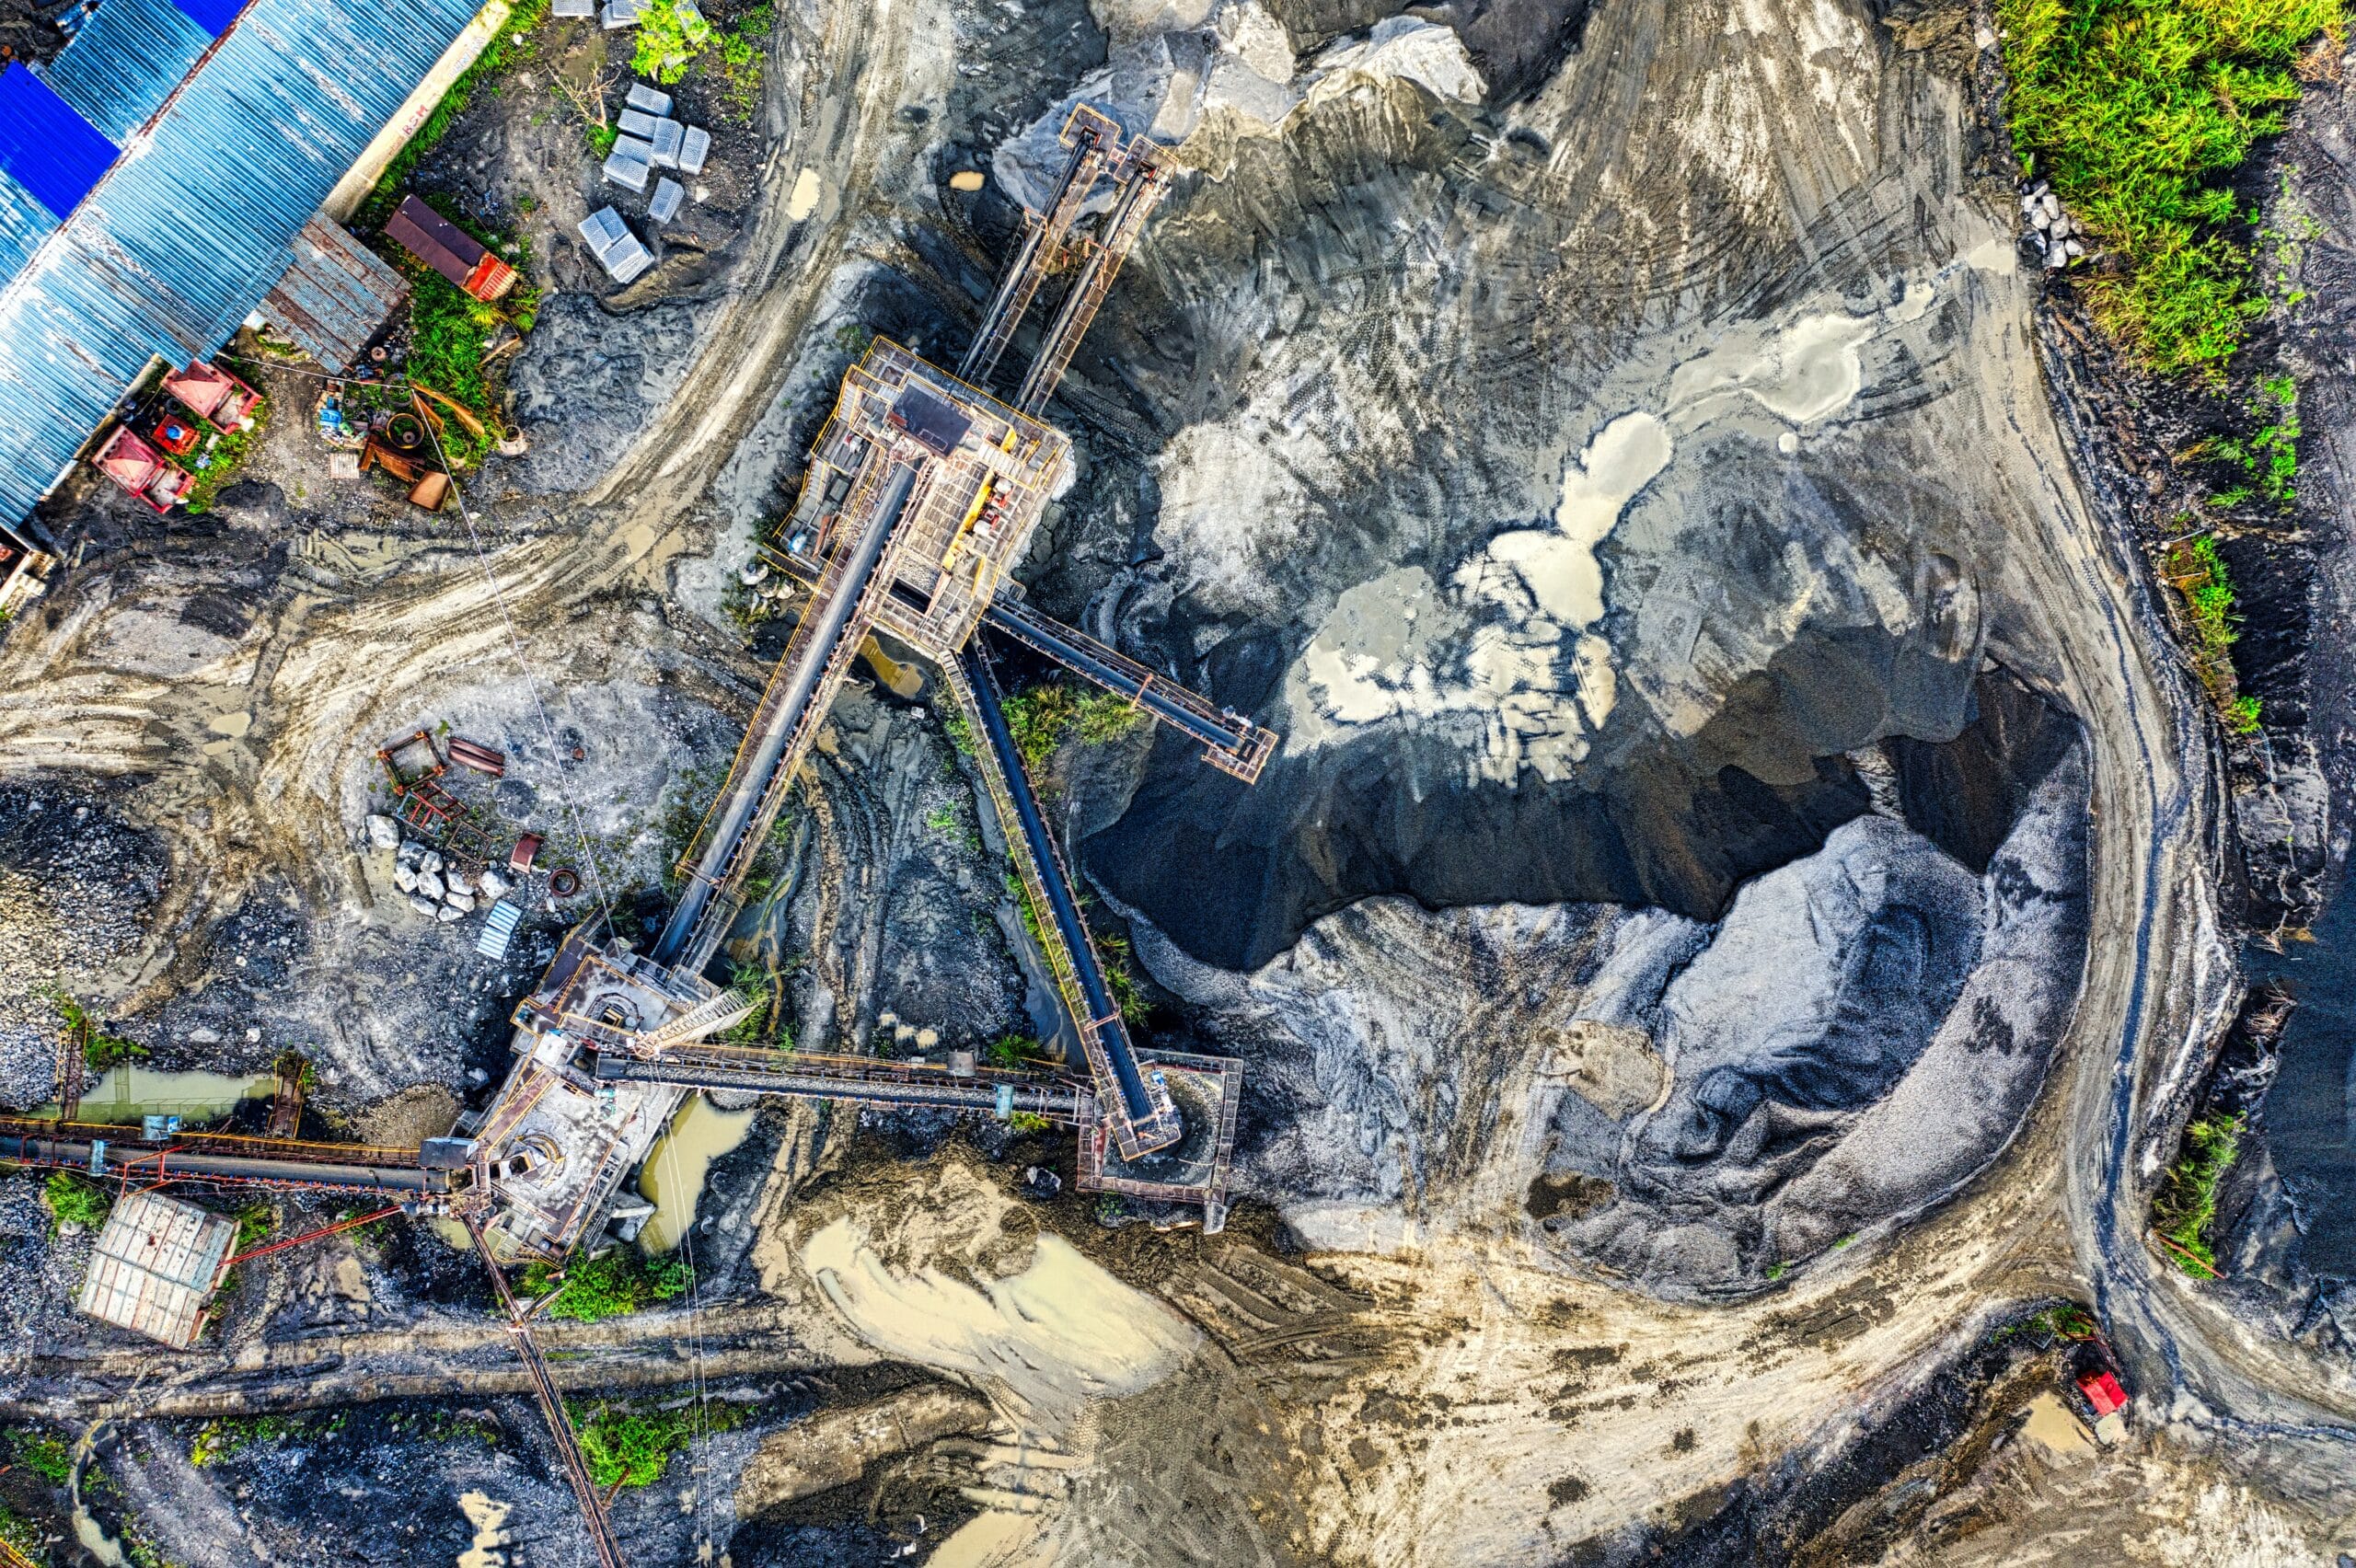 Panoramic View of a Mine with Mining Machines over Rocks